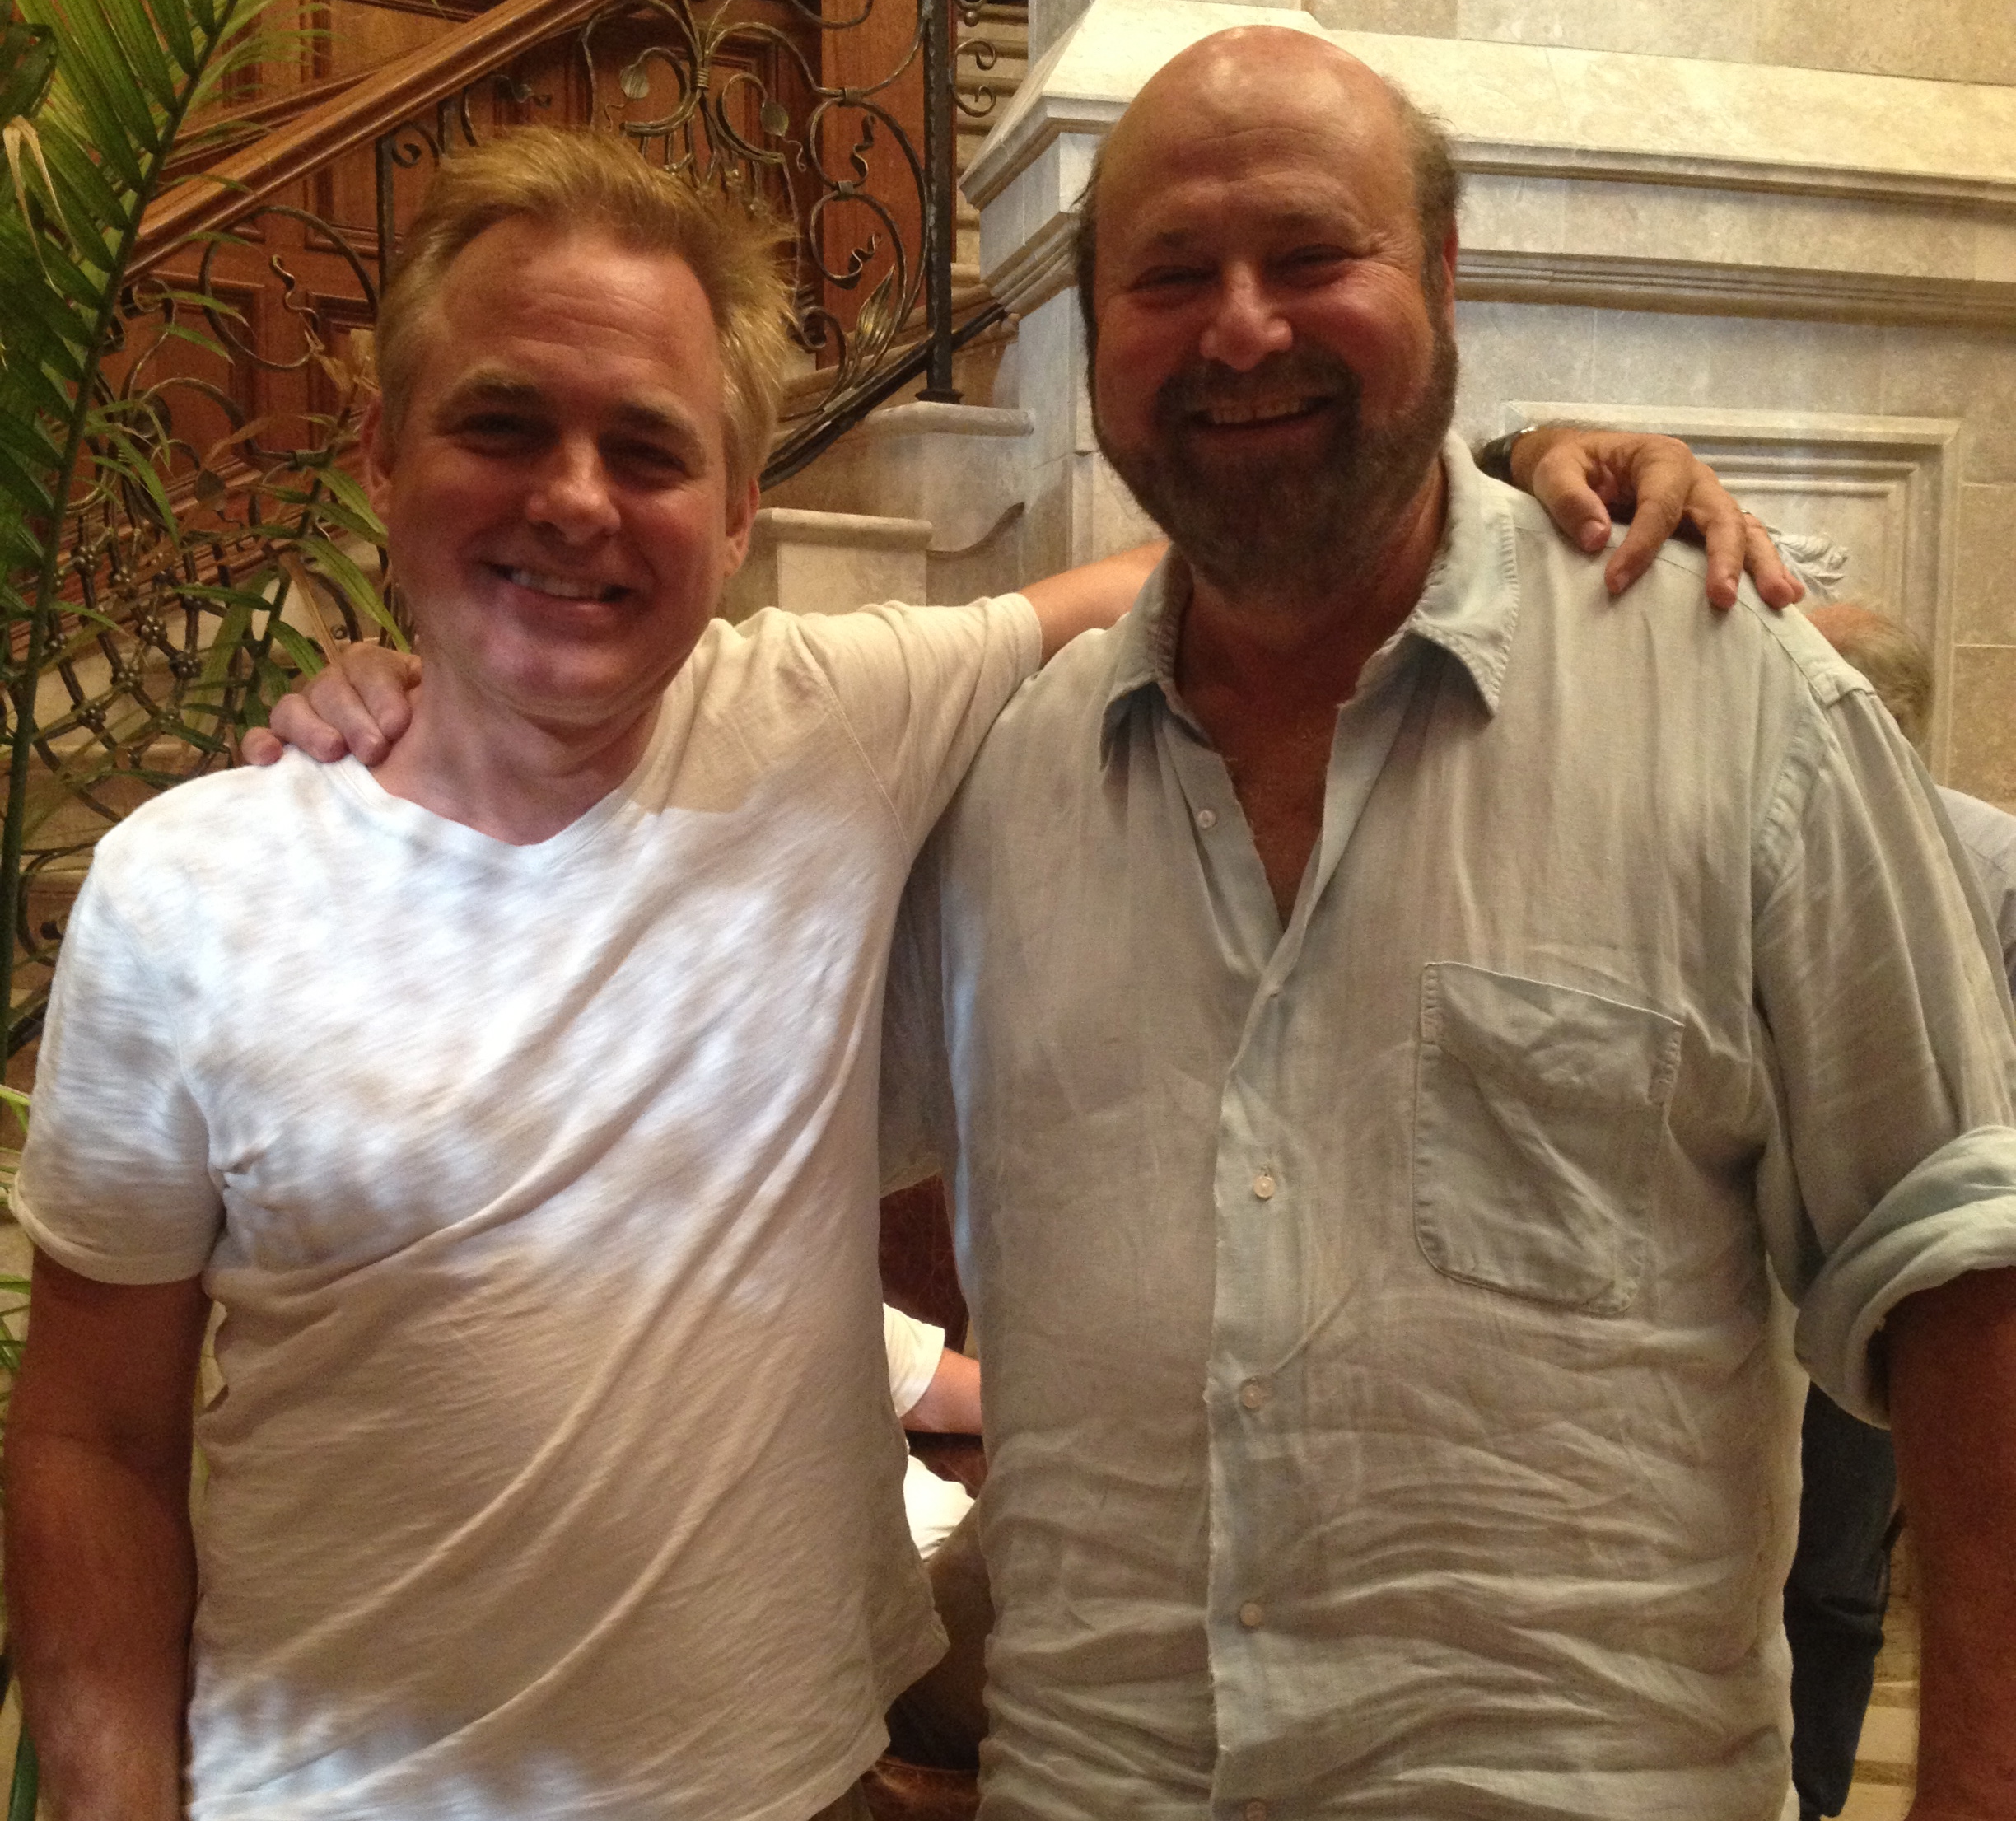 Grant and Rob reiner on the set of And So It Goes